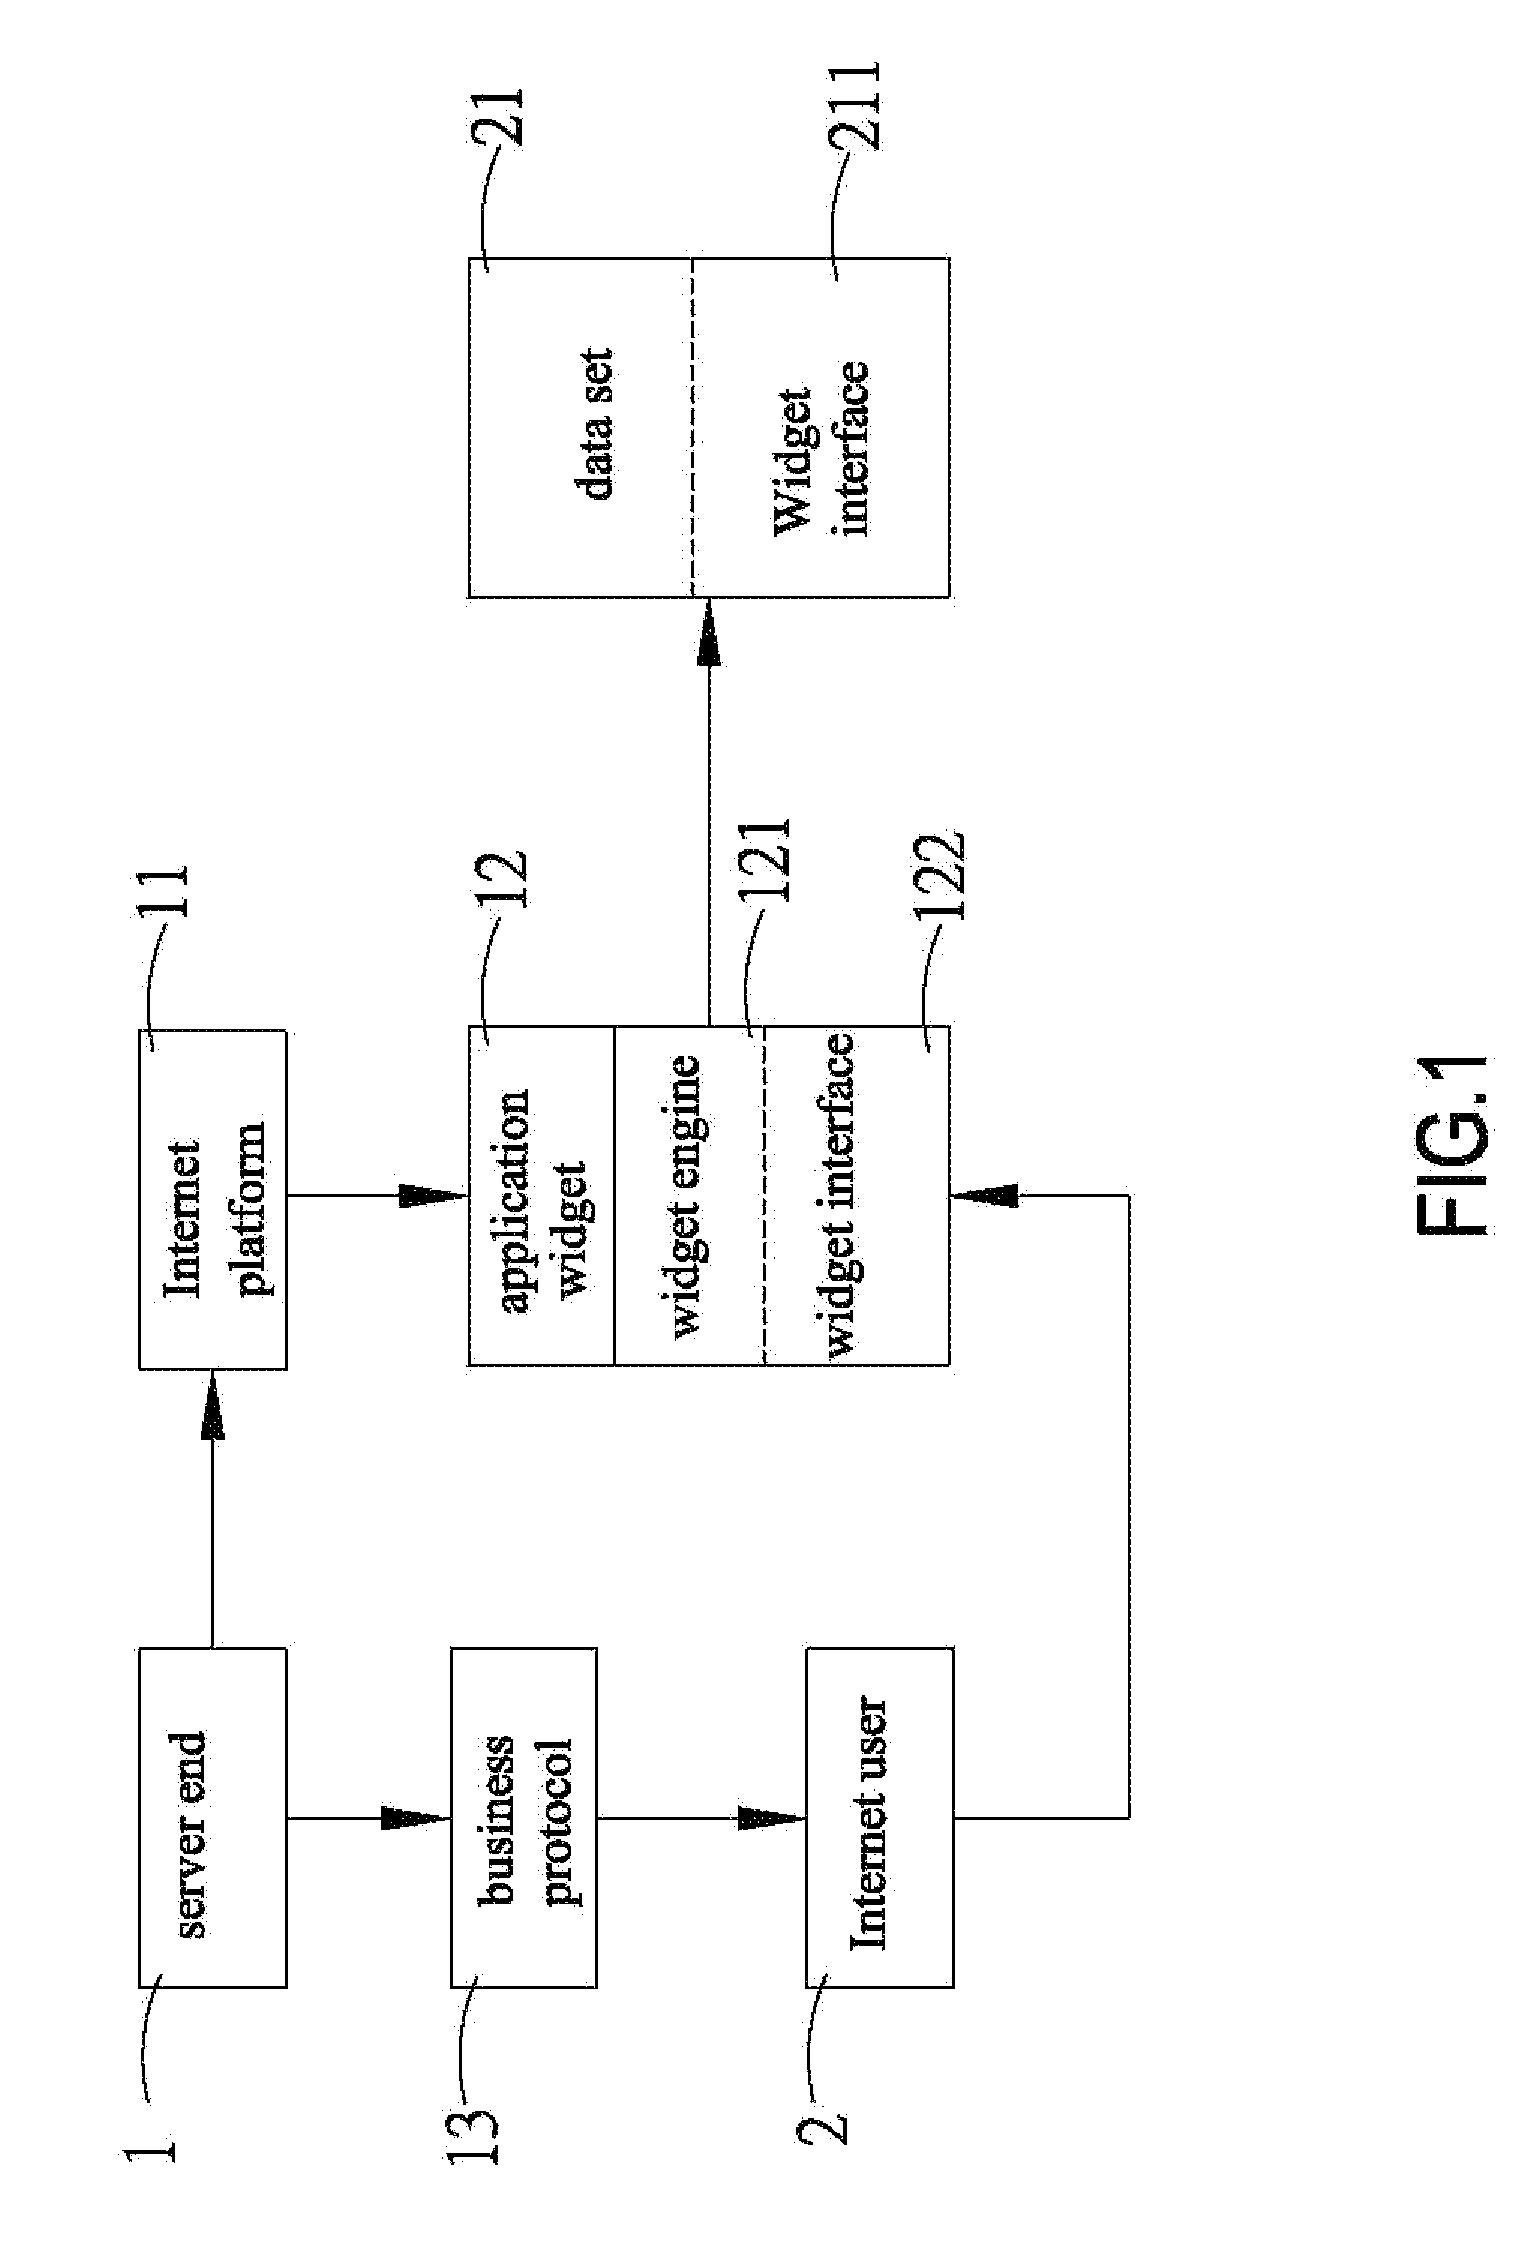 Business model based on multi-level application widgets and system thereof